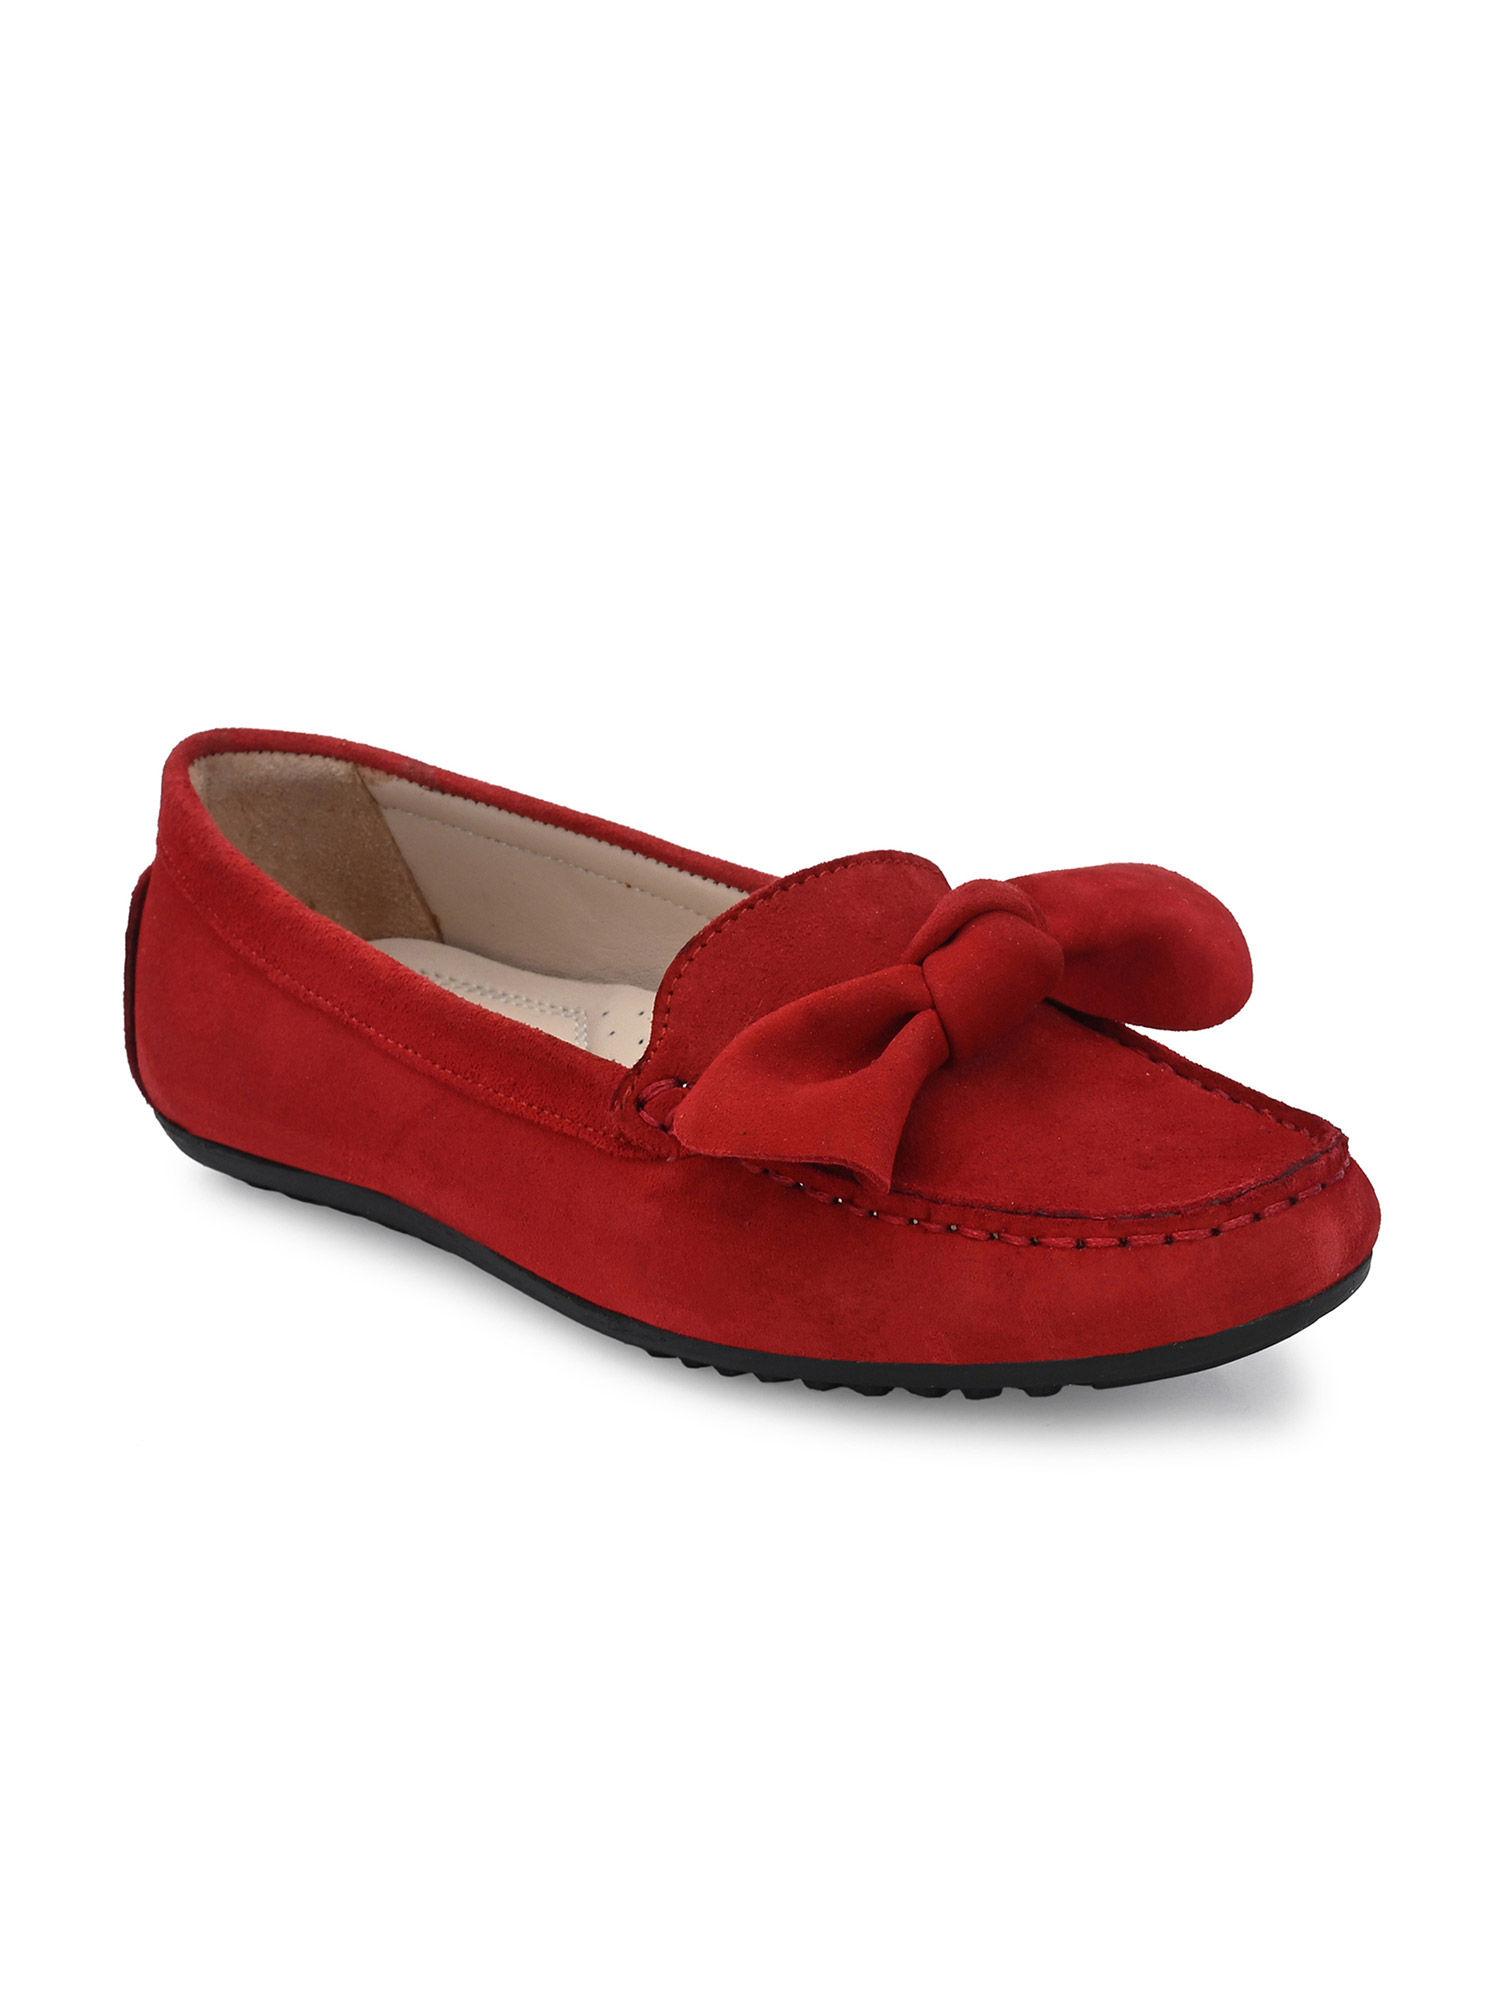 solid red leather mocassins